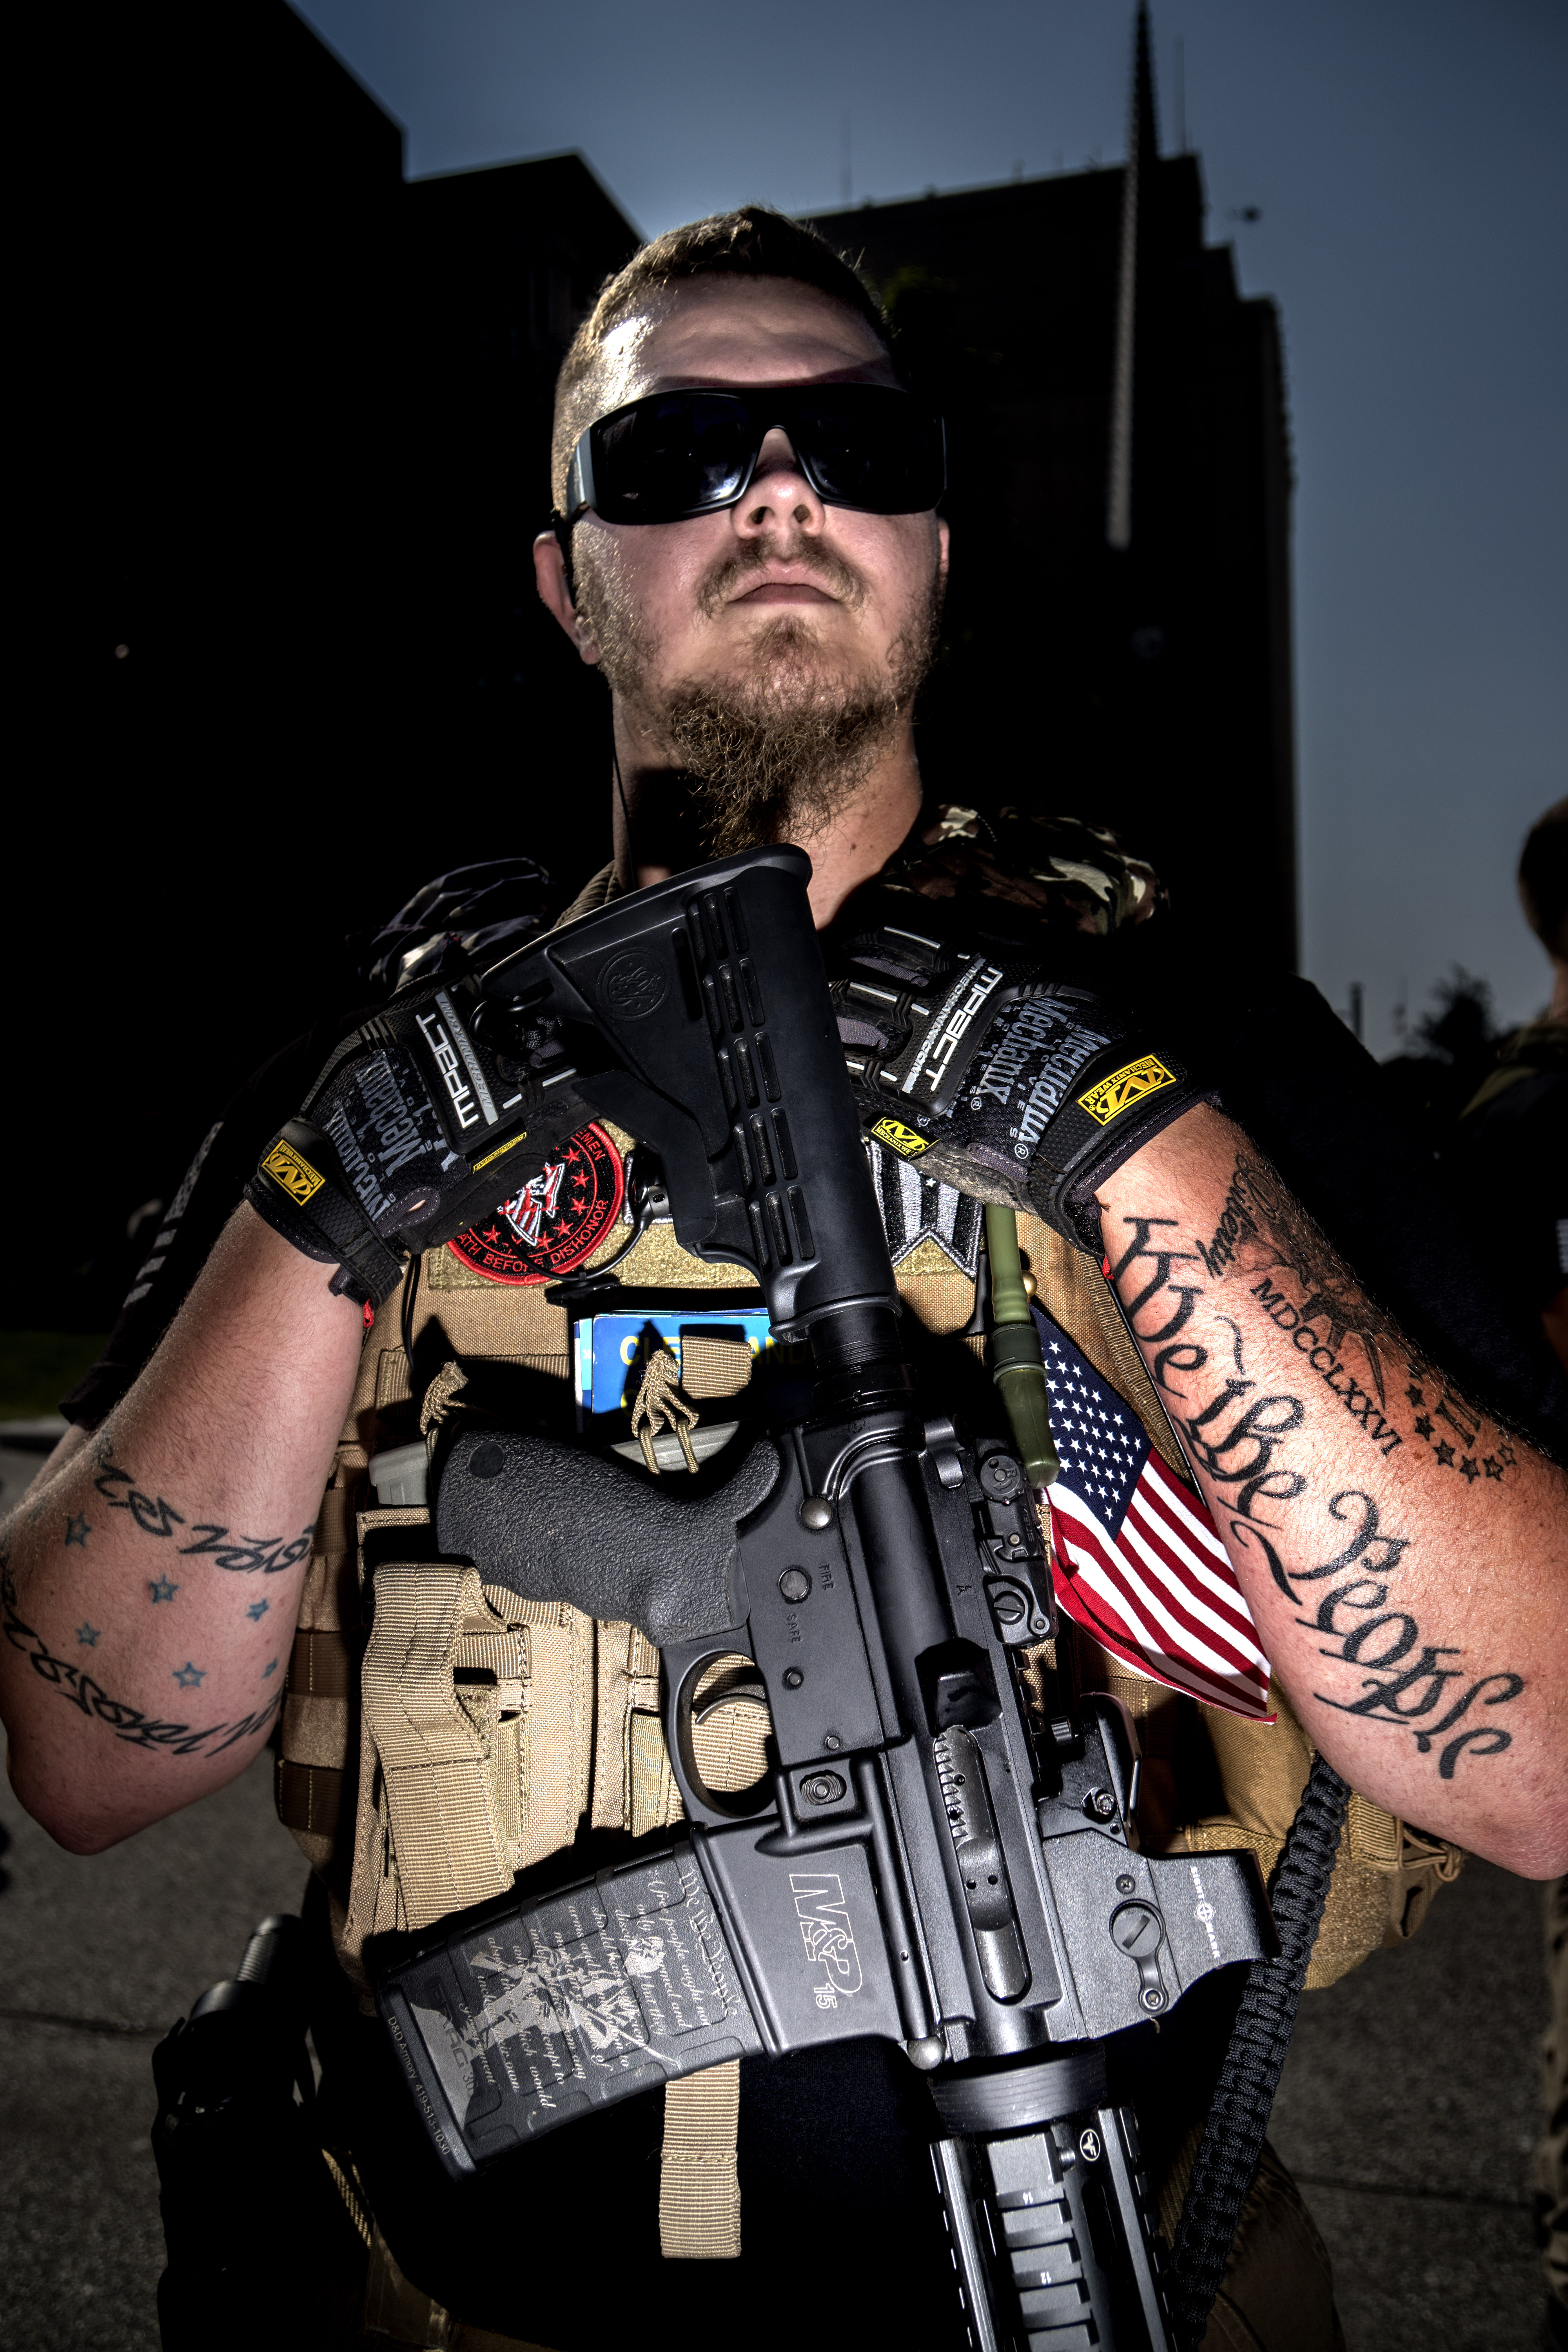 Trevor Leis, of Lime, supports open carry at the Cleveland Public Square amidst various protests at the Republican National Convention in Cleveland on July 19, 2016.